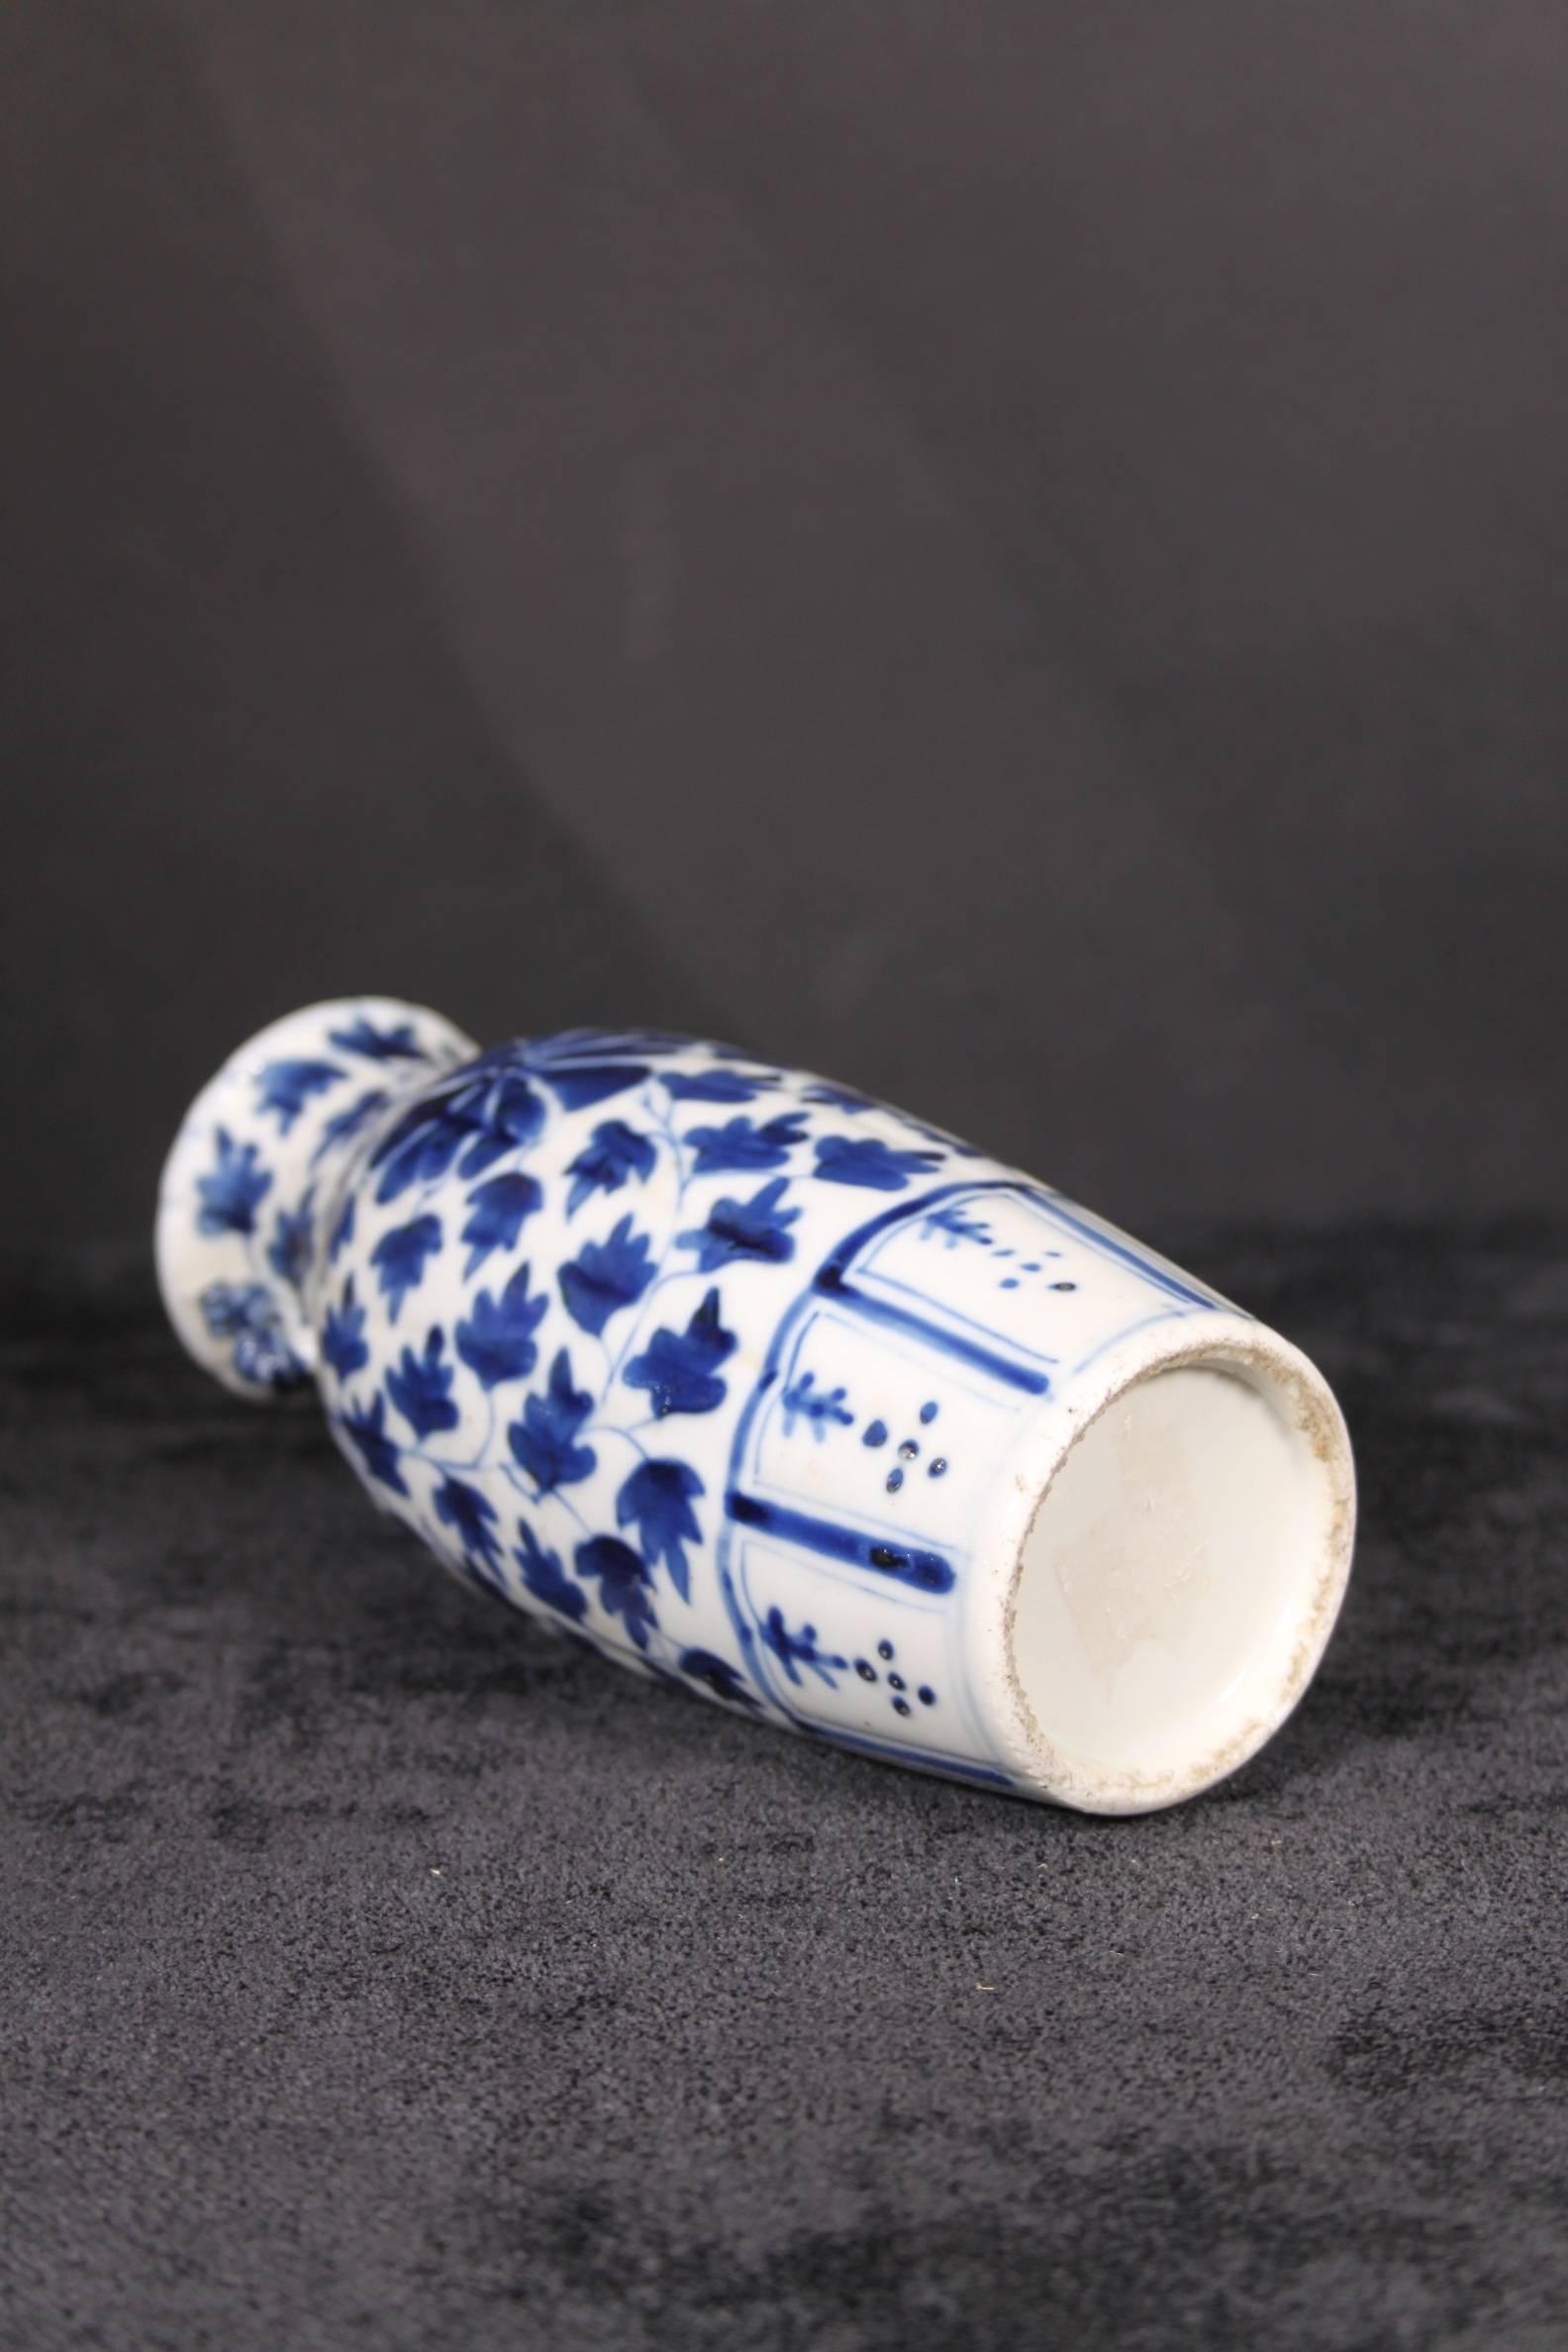 Chinese Blue and White Porcelain Vase Qing Dynasty Period, Circa 1900 For Sale 2